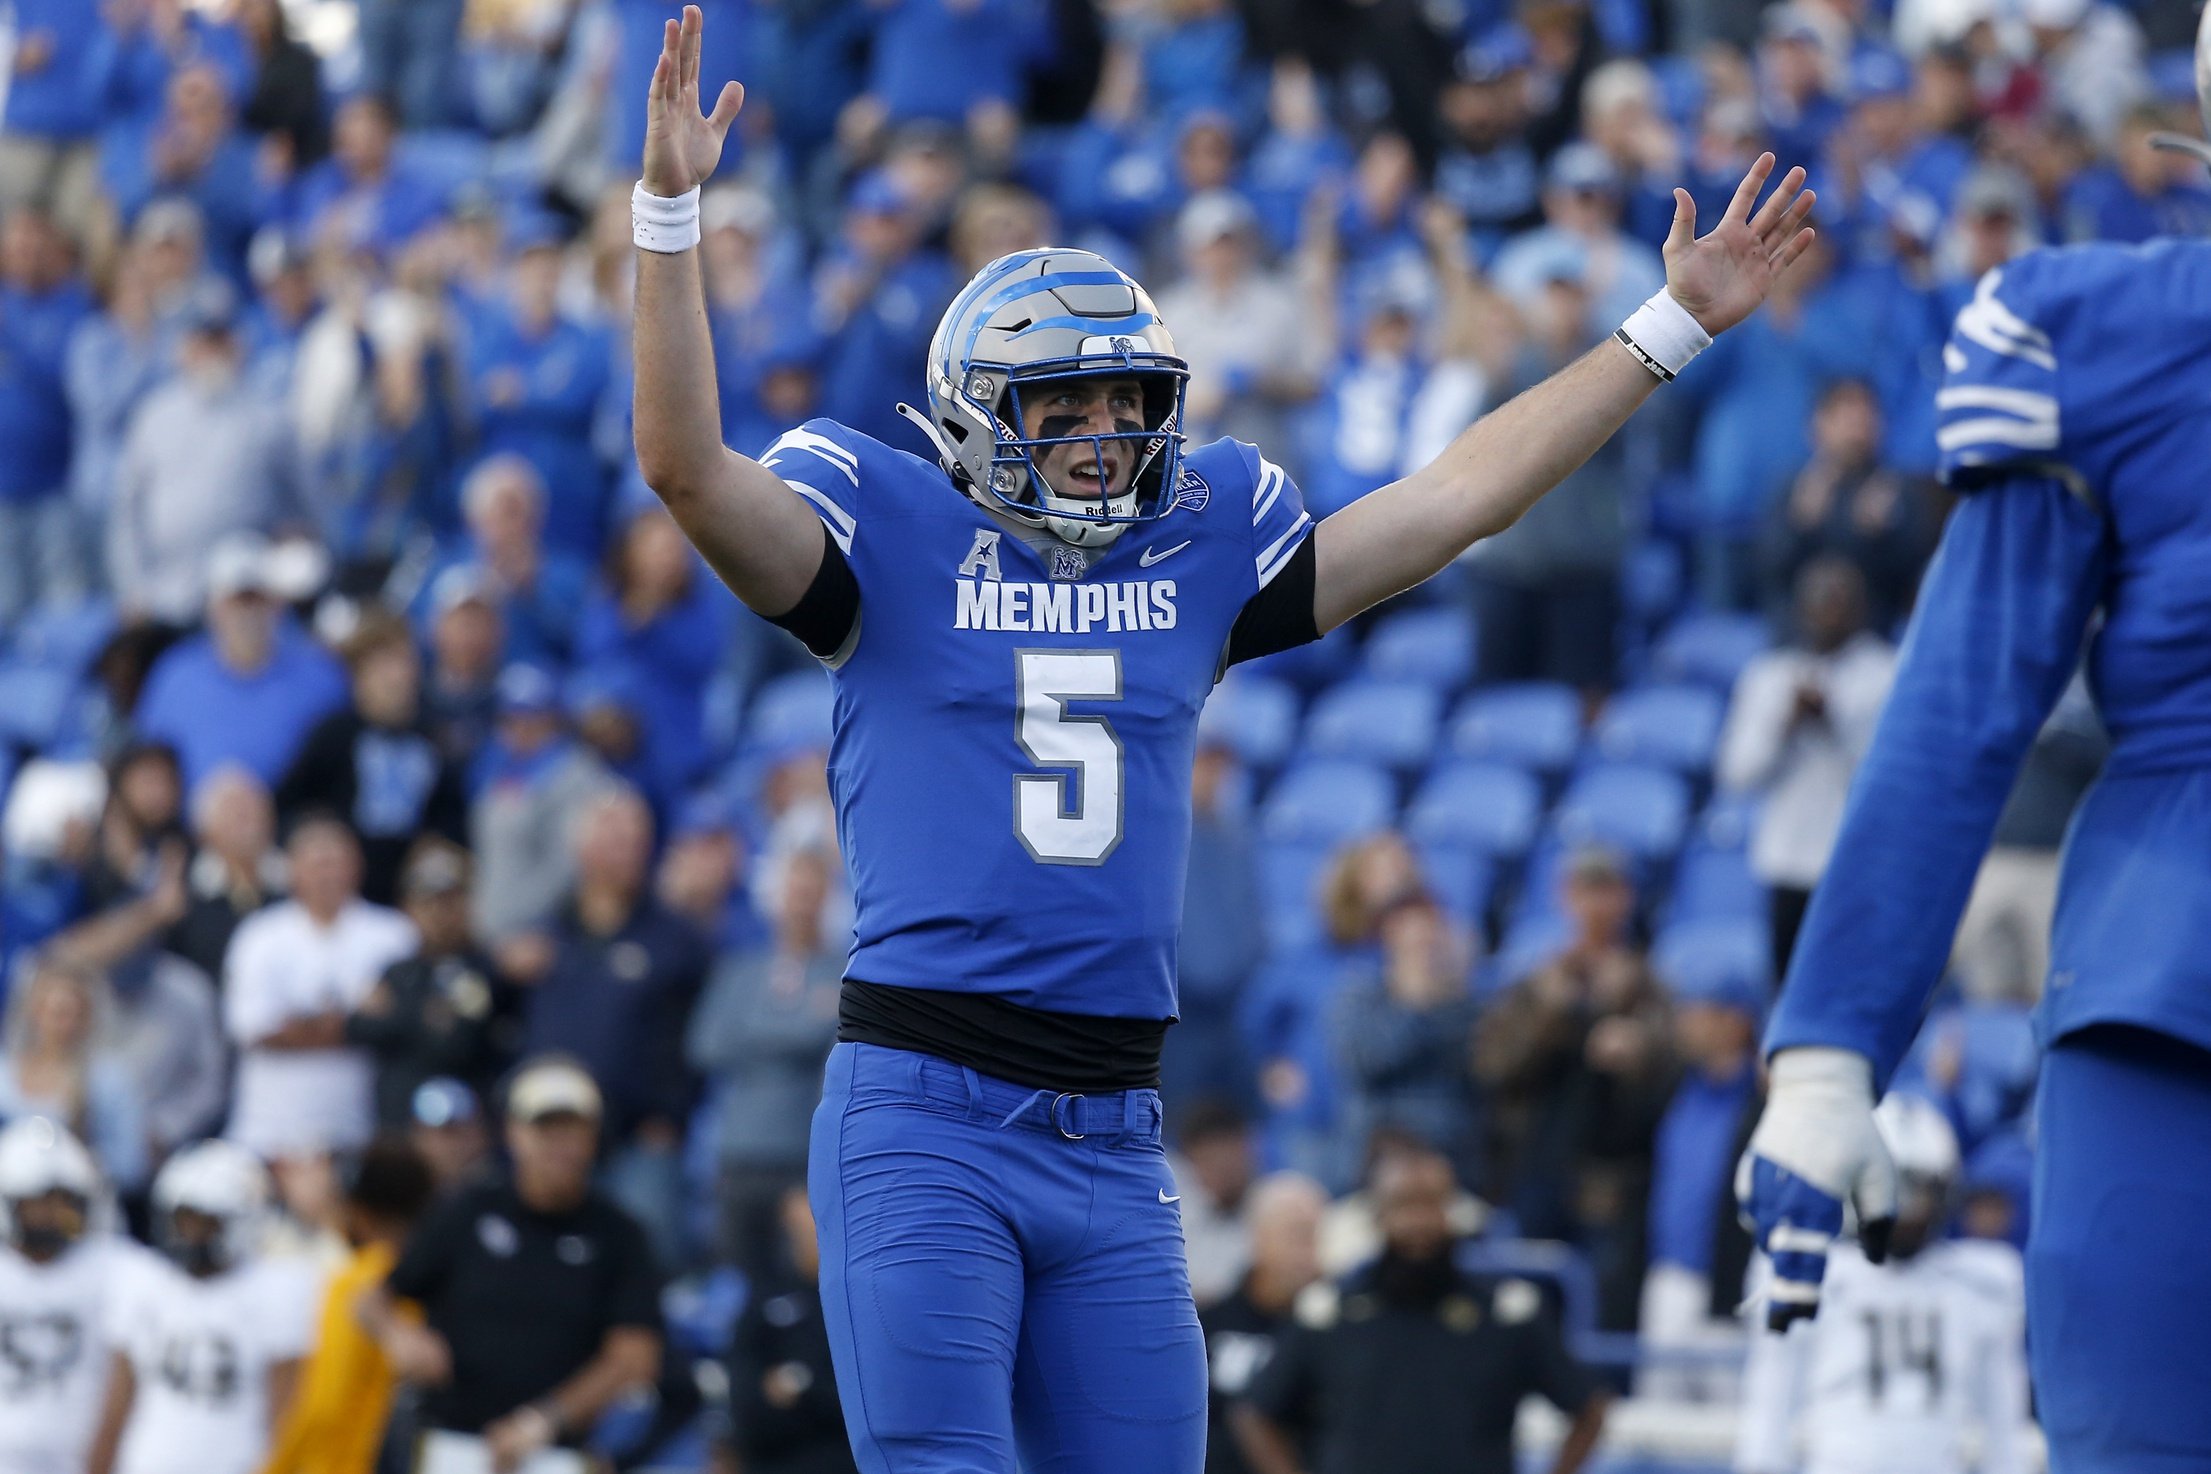 Memphis Tigers Preview: Roster, Prospects, Schedule, and More